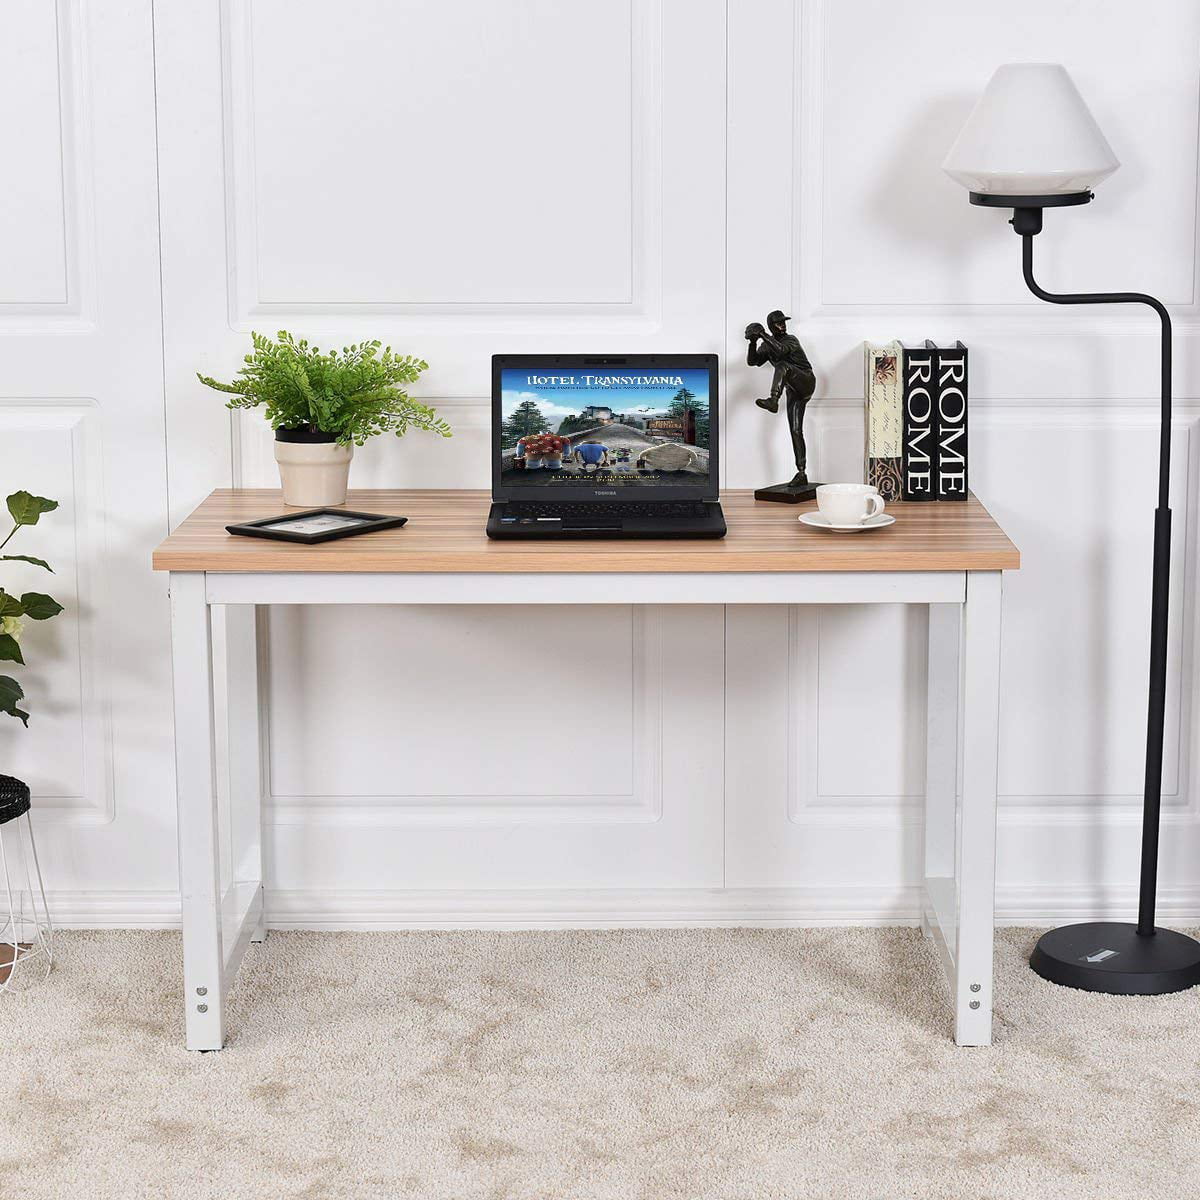 Details about   Computer Desk PC Laptop Table Wood Workstation Study Home Office Furniture White 